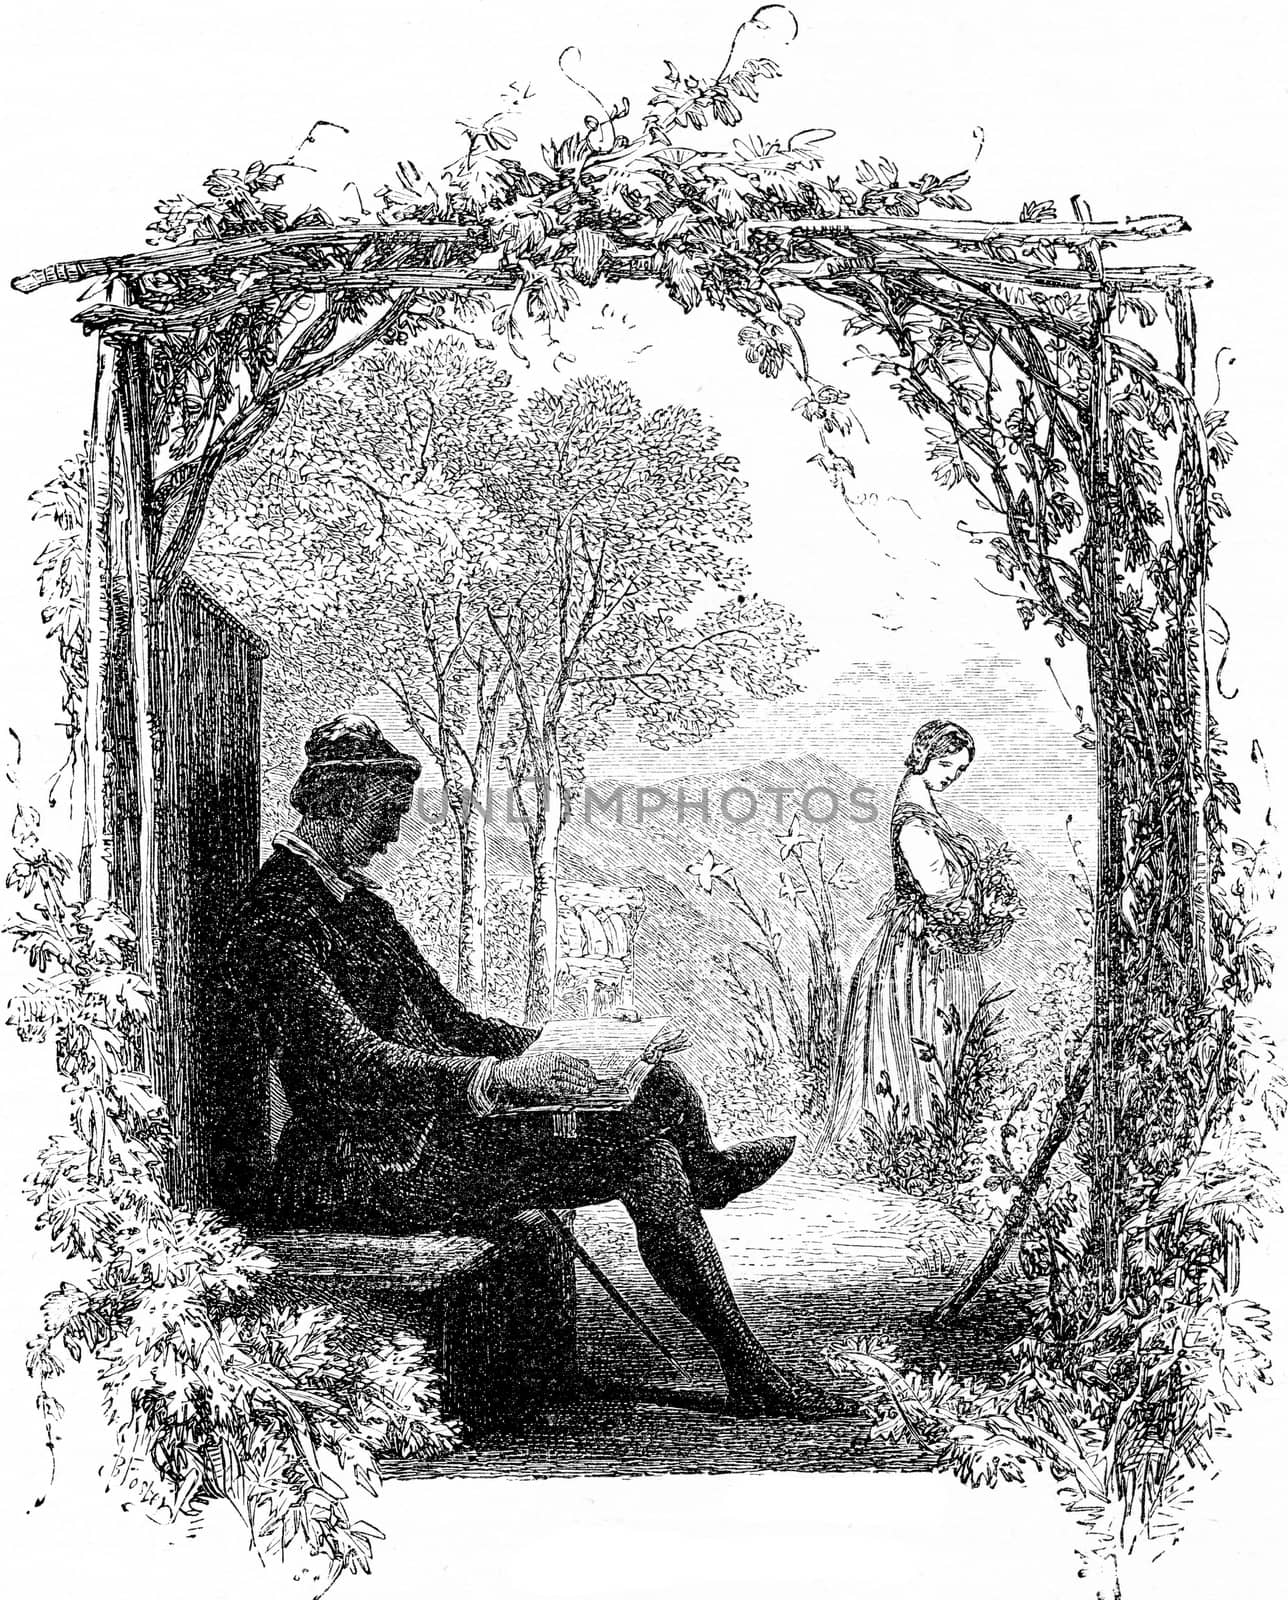 Faust and Marguerite, vintage engraved illustration. From Chemin des Ecoliers, 1861.
